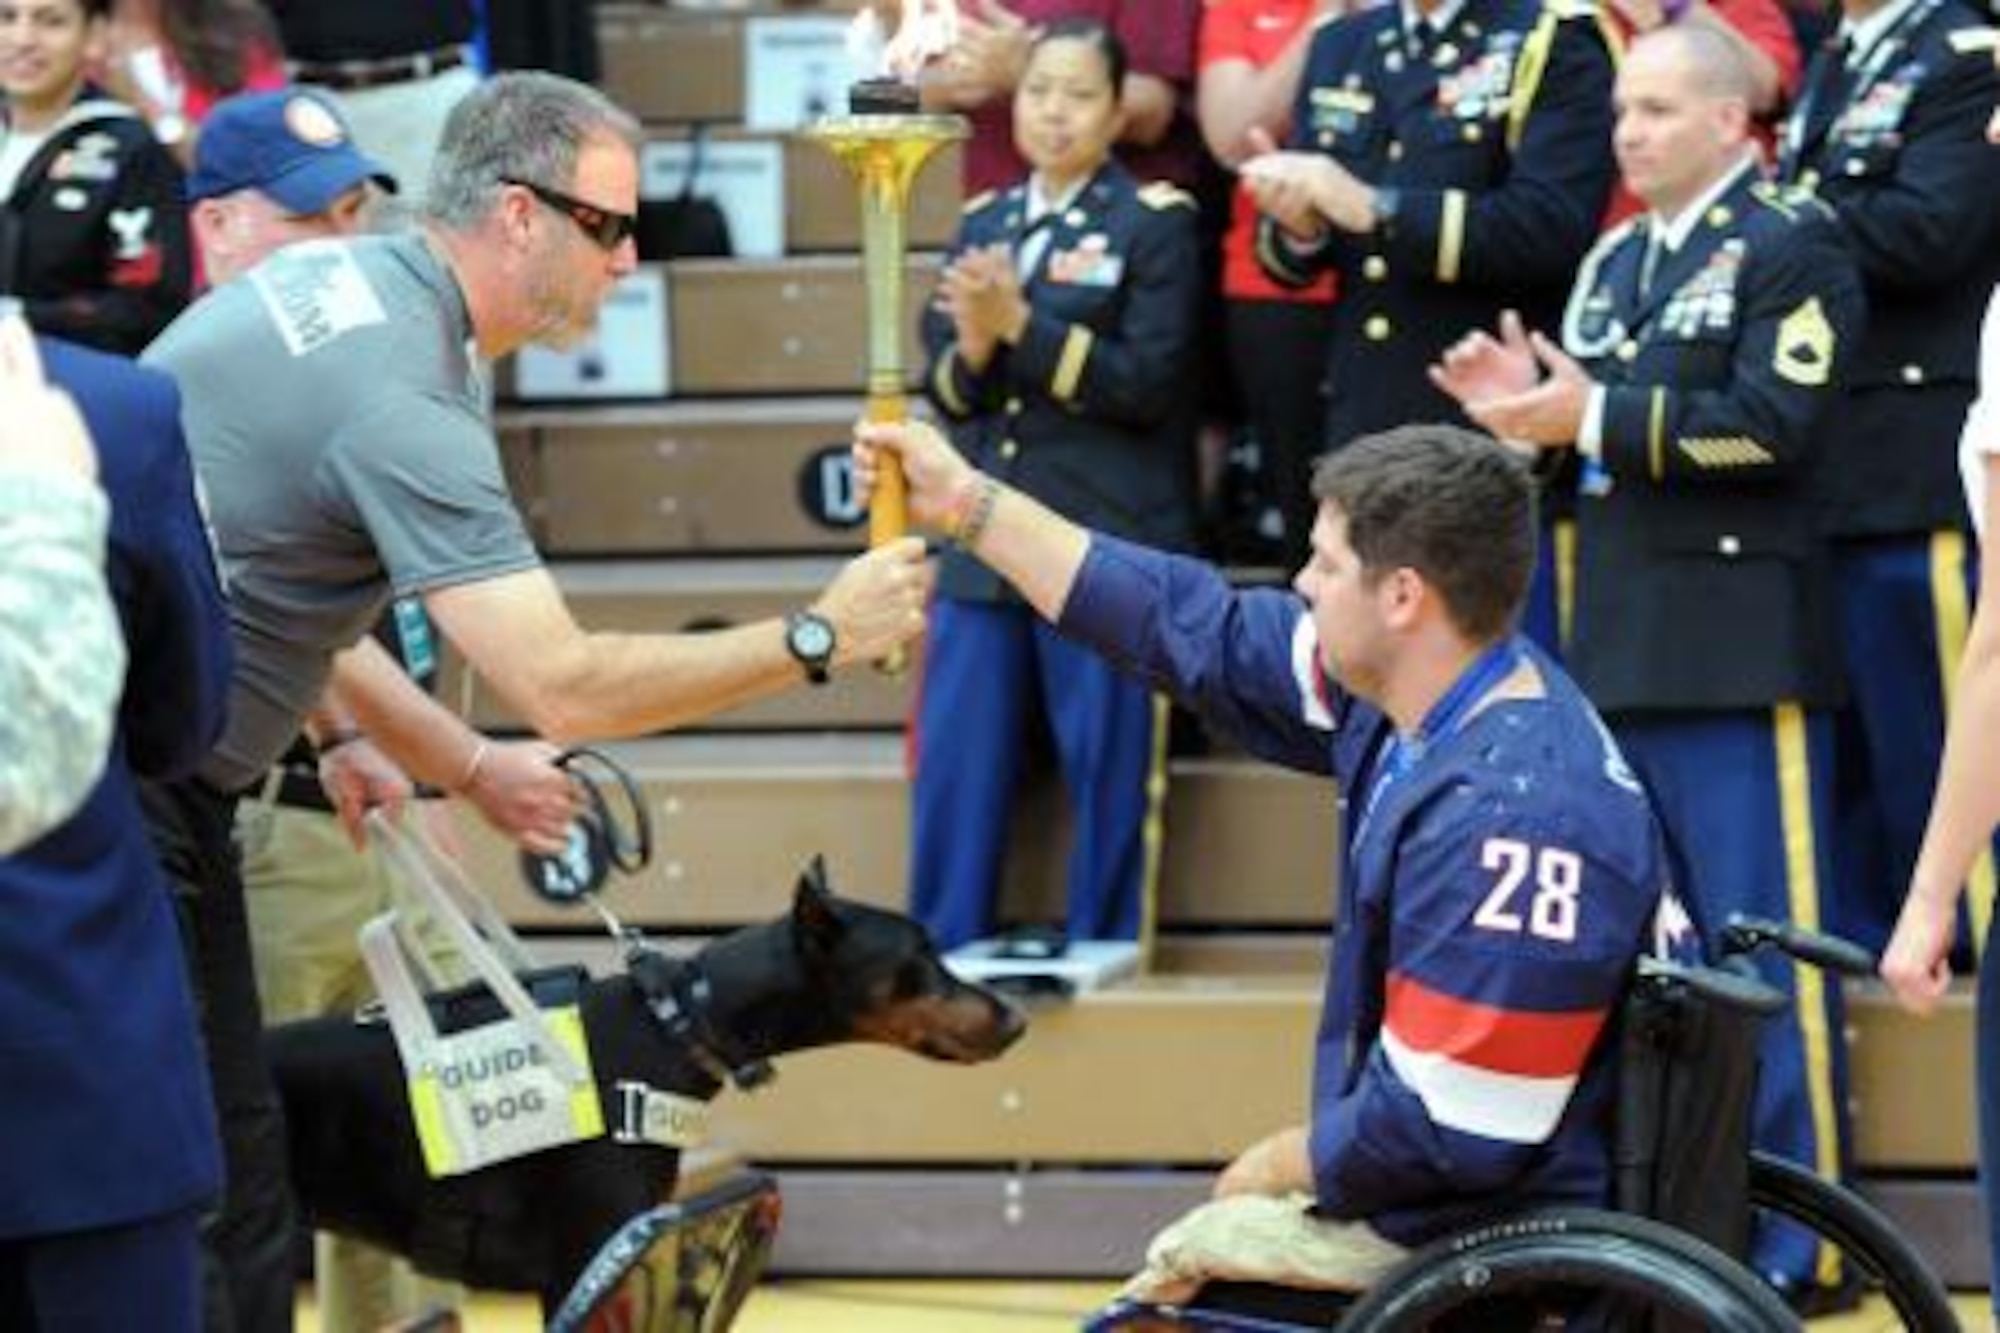 Army Sgt. First Class Doug Franklin of the Army Special Operations Command team passes the Olympic torch to retired Marine Cpl. Paul Schaus, who is a gold medal Paralympian, during the opening ceremony for the 2014 Warrior Games at the Olympic Training Center in Colorado Springs, Colo., Sept. 28, 2014. (DoD News photo by EJ Hersom)